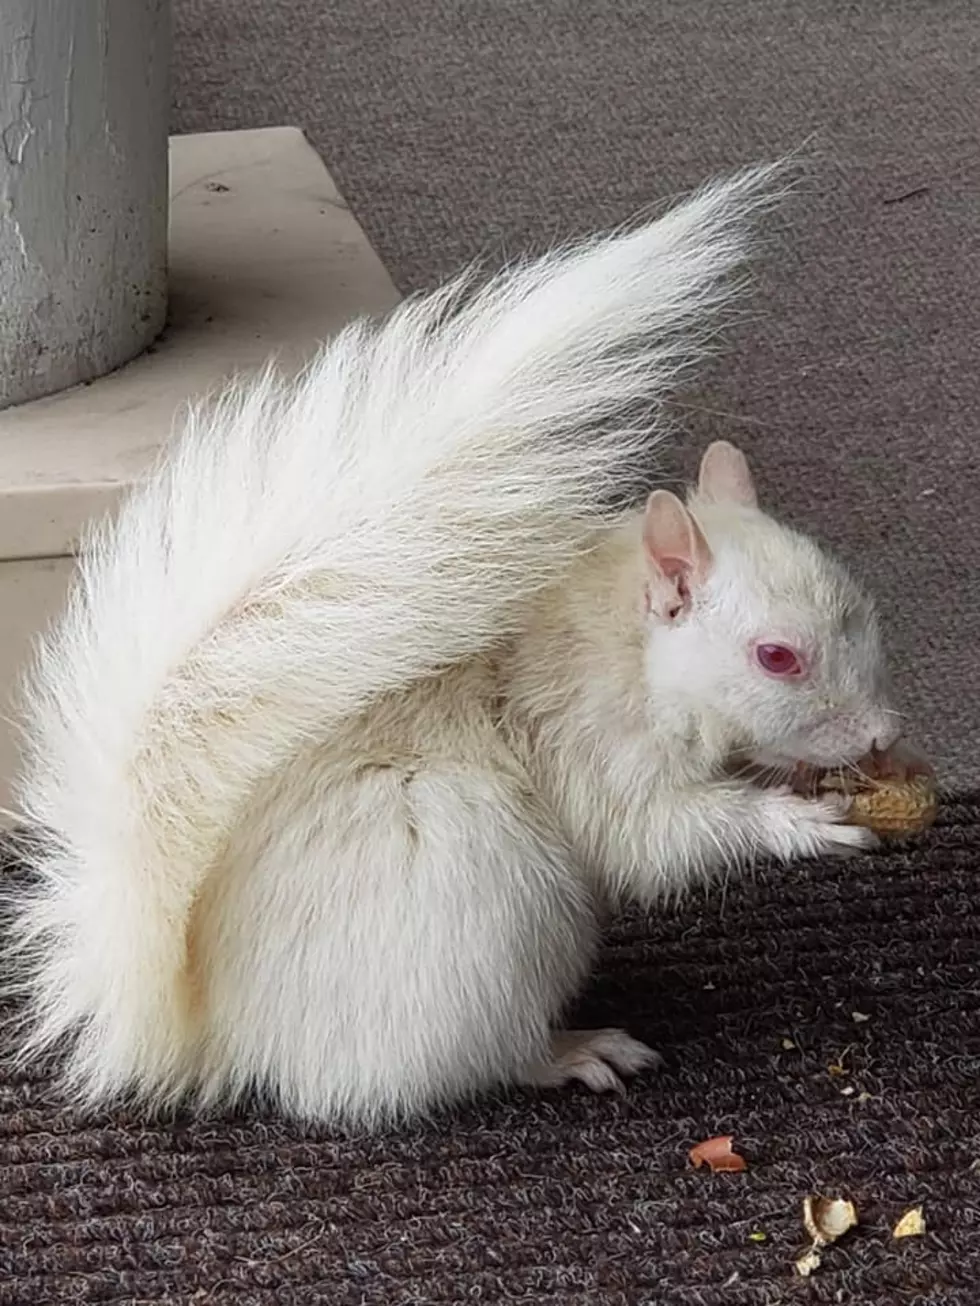 Oneonta Albino Squirrels NOT A Myth!